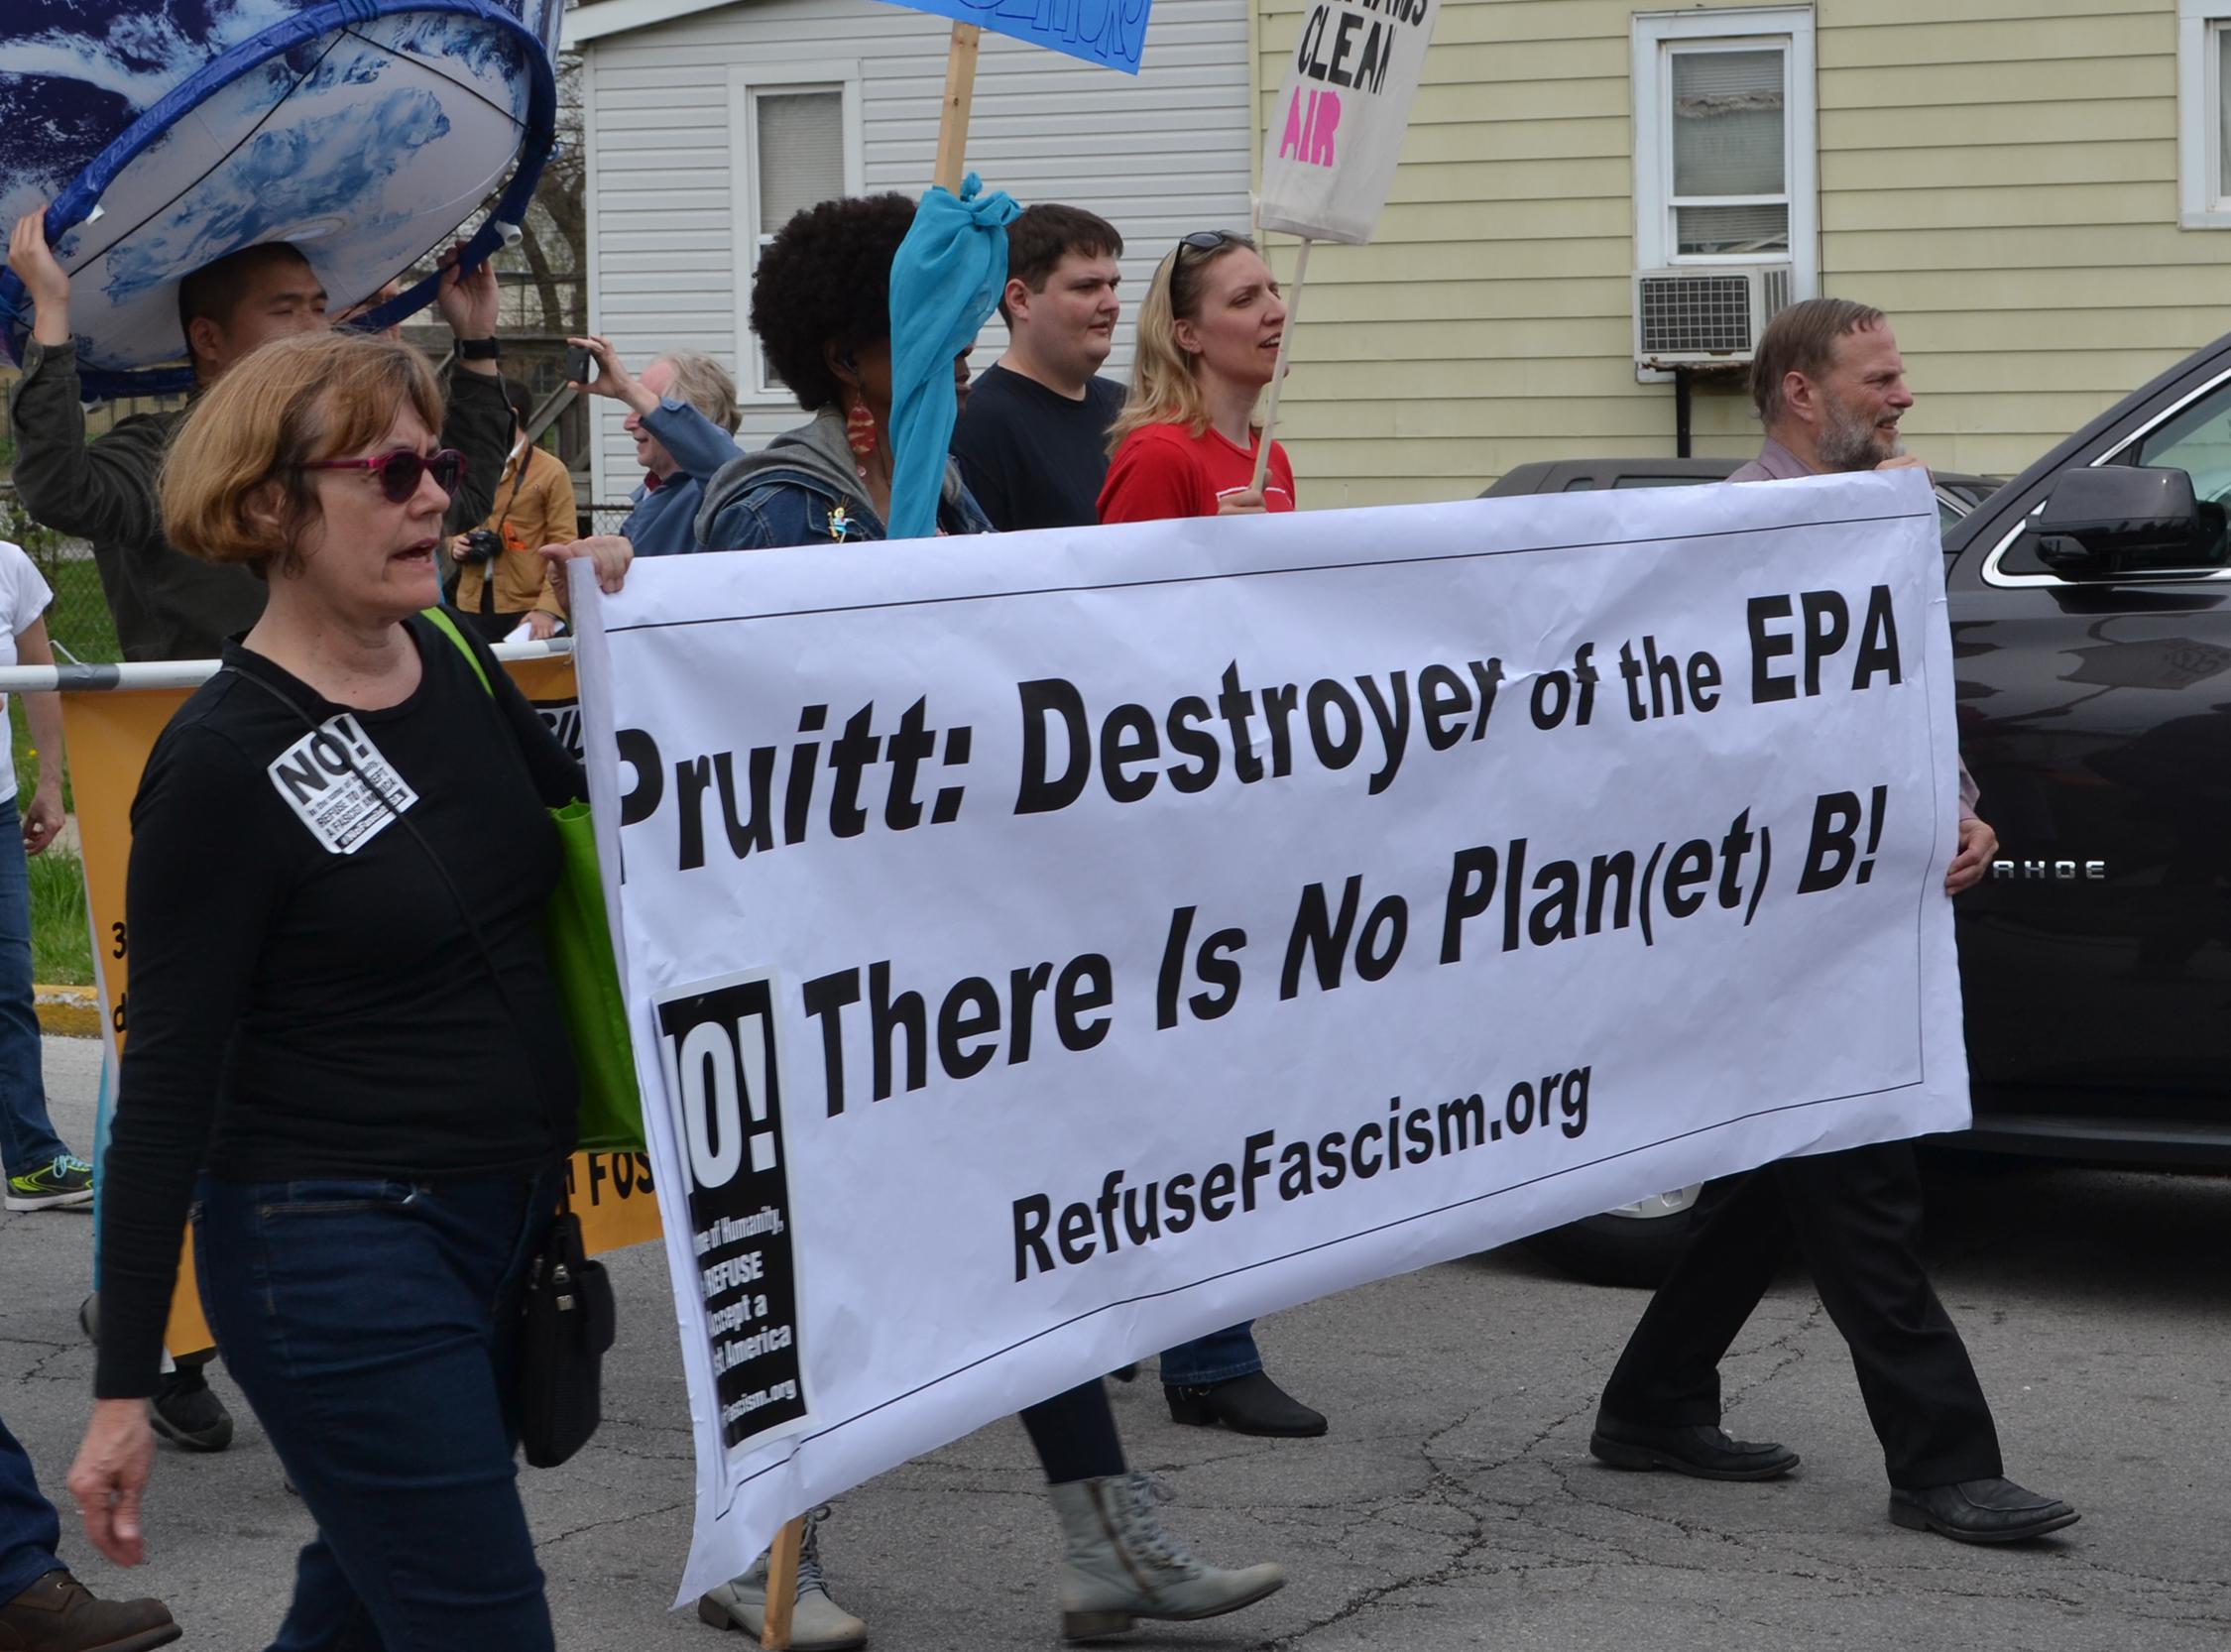 East Chicago residents and activists protest EPA head Scott Pruitt's visit April 19 to the city's lead-contaminated neighborhoods. (Alex Ruppenthal / Chicago Tonight)